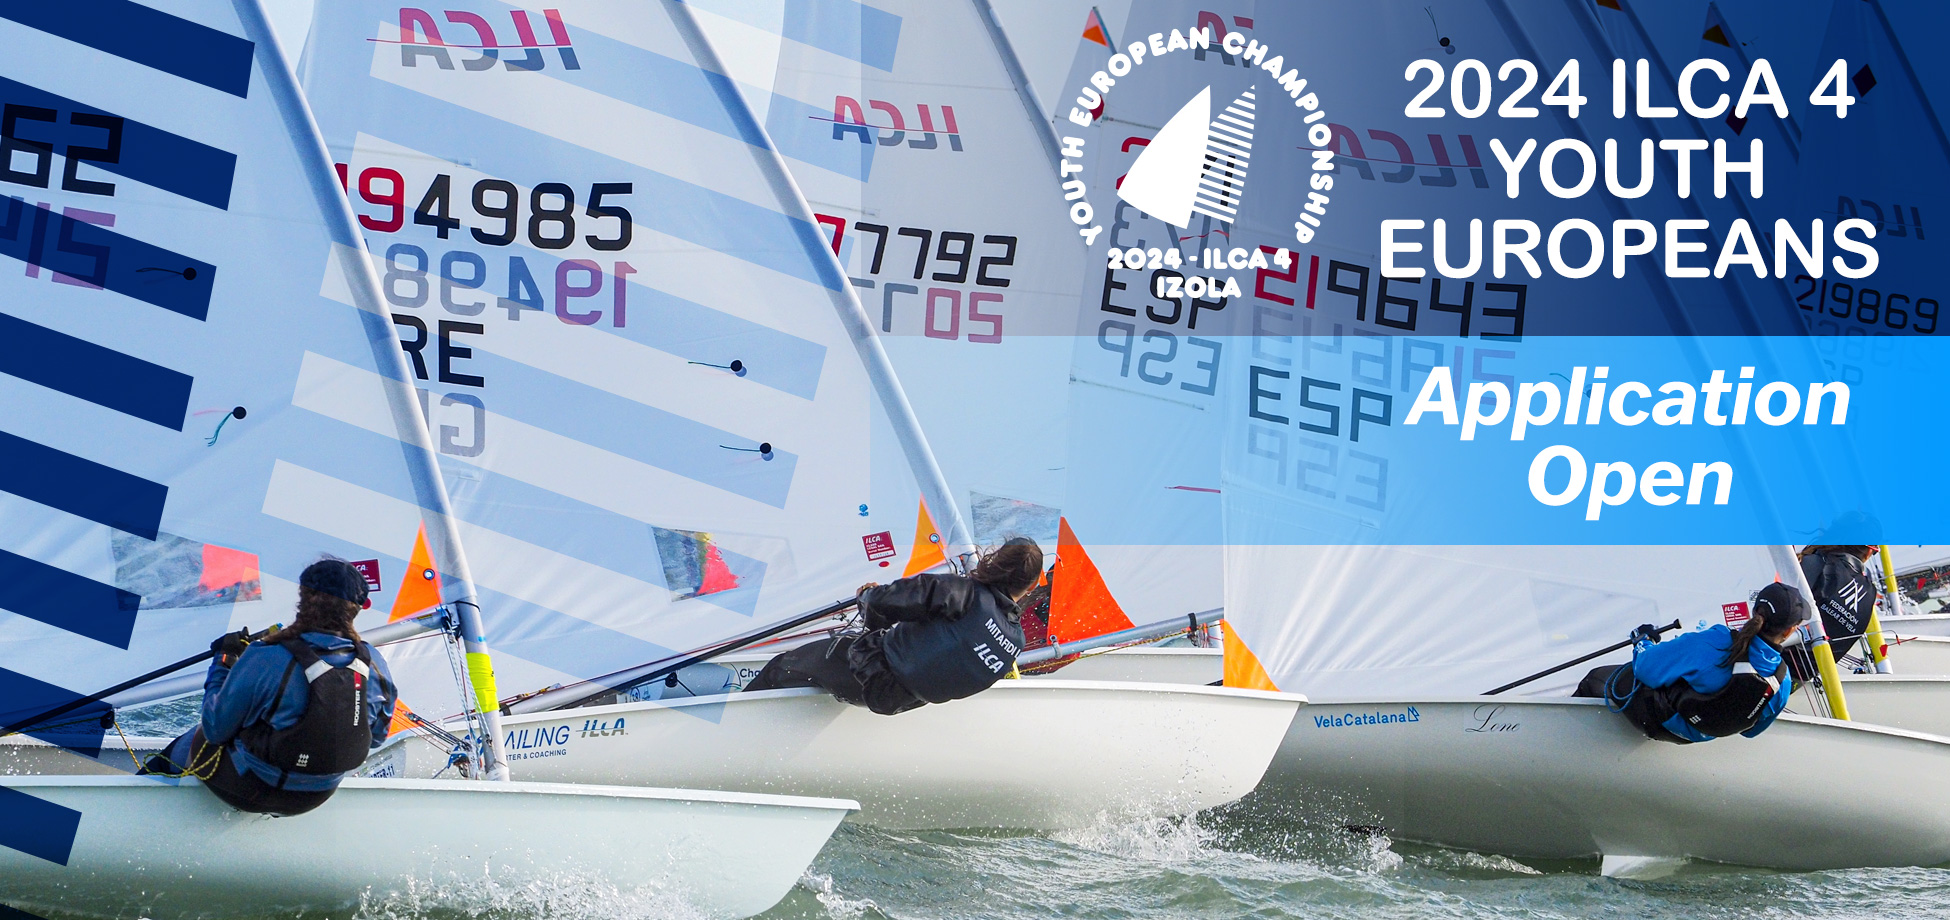 application open 2024 ilca 4 youth europeans